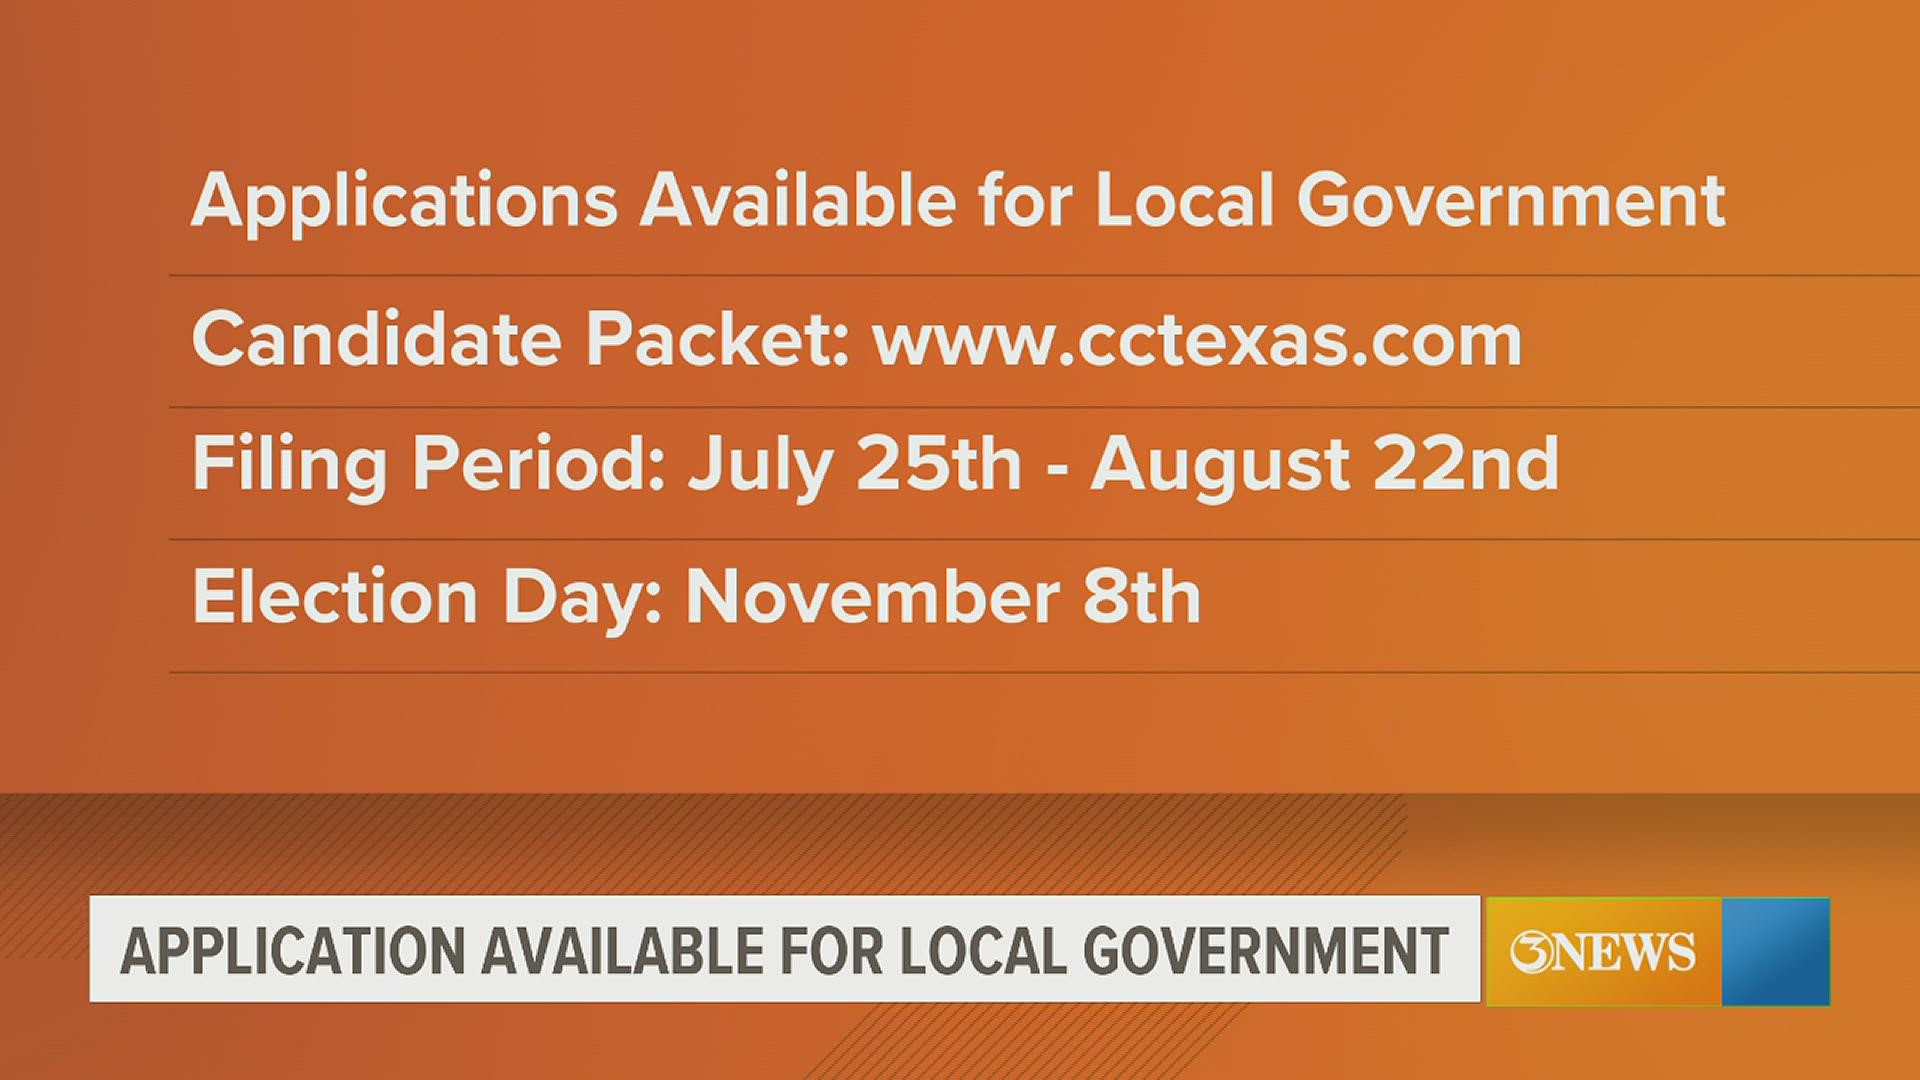 Corpus Christi resident will be able to apply for local government.